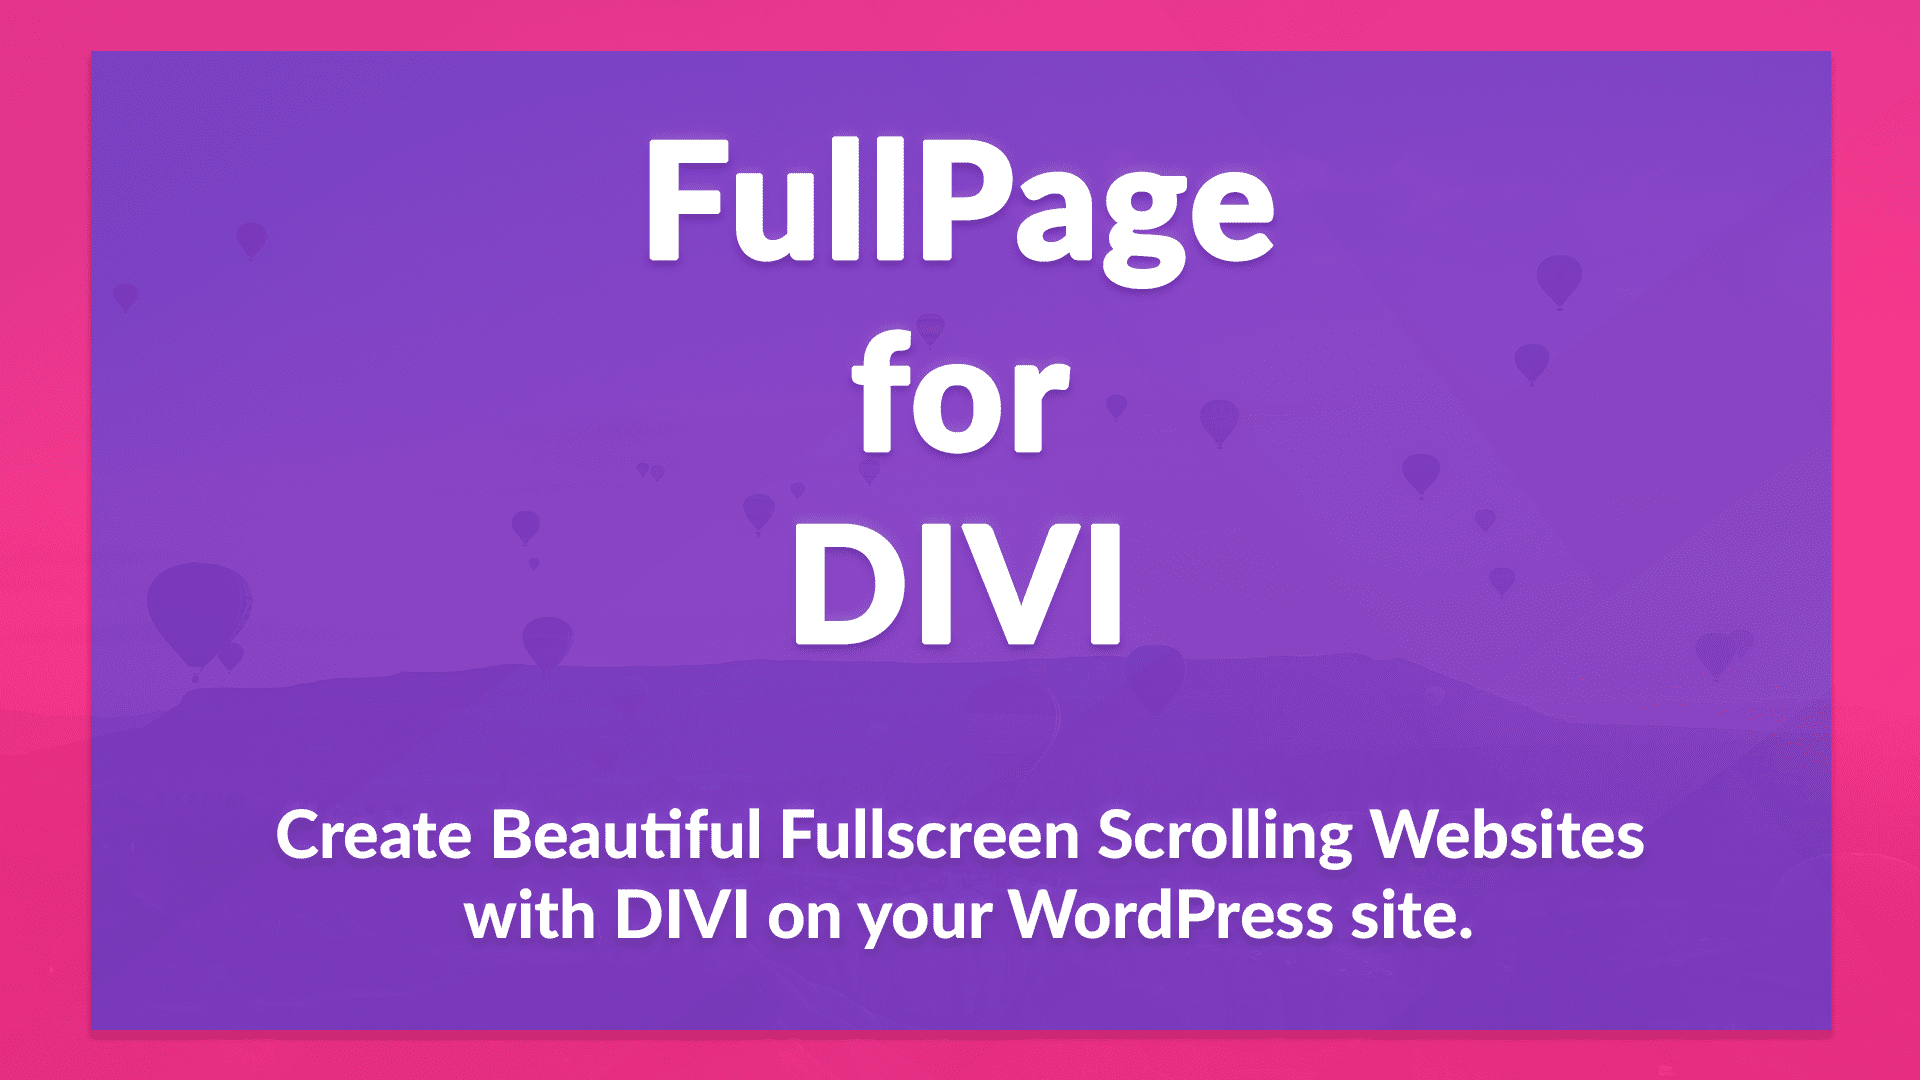 Create beautiful fullscreen scrolling web sites with WordPress and Divi, fast and simple.